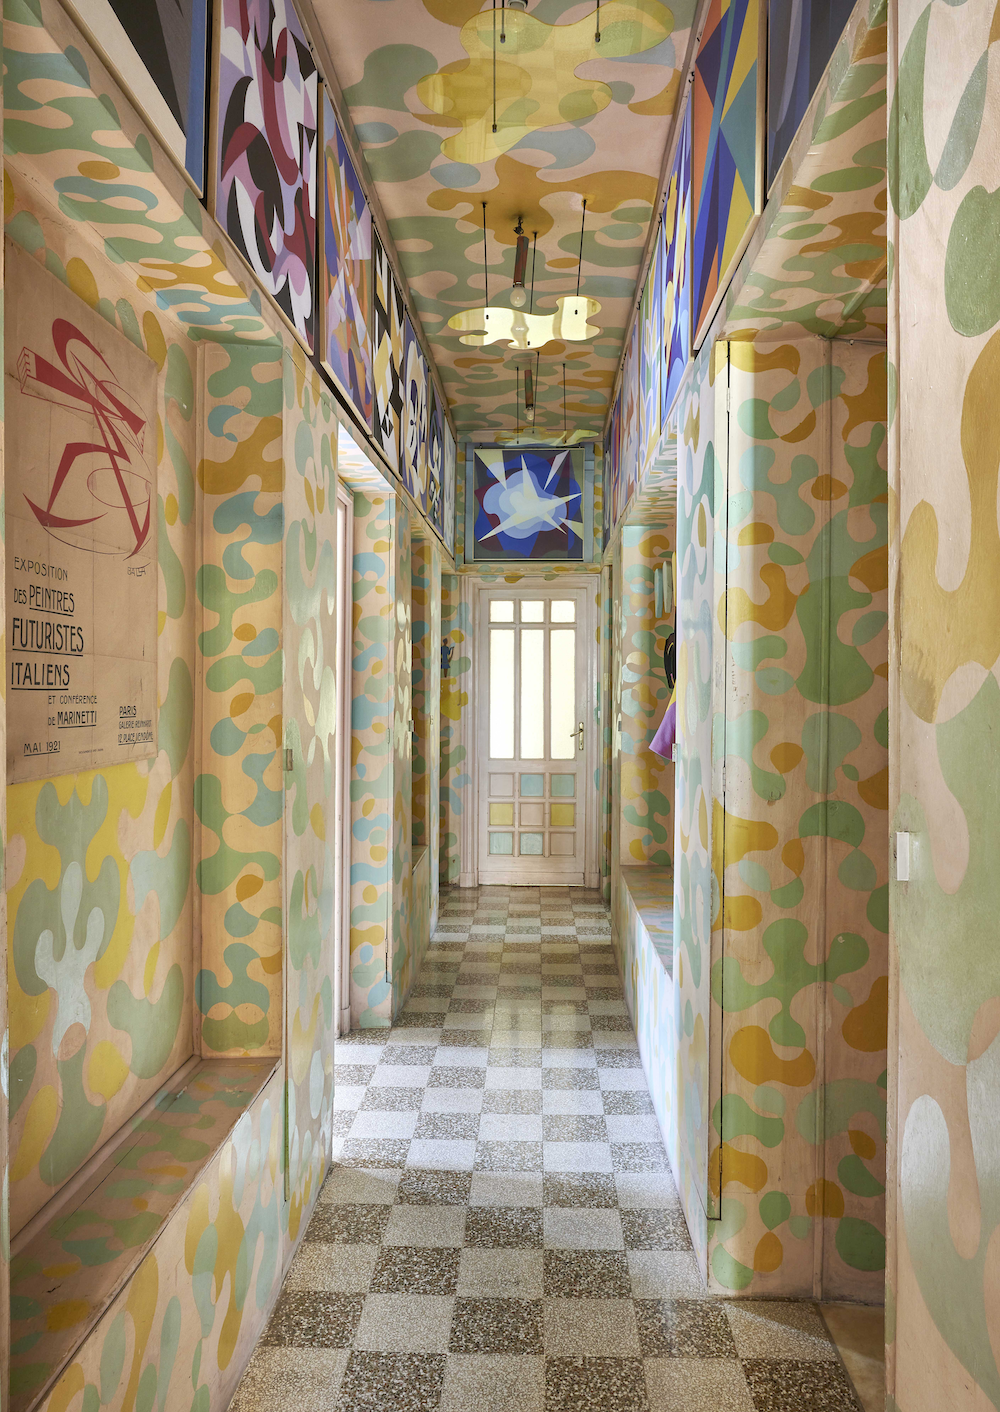 An Italian Futurist’s Kaleidoscopic Apartment Welcomes Visitors Into a Vibrant World of Color